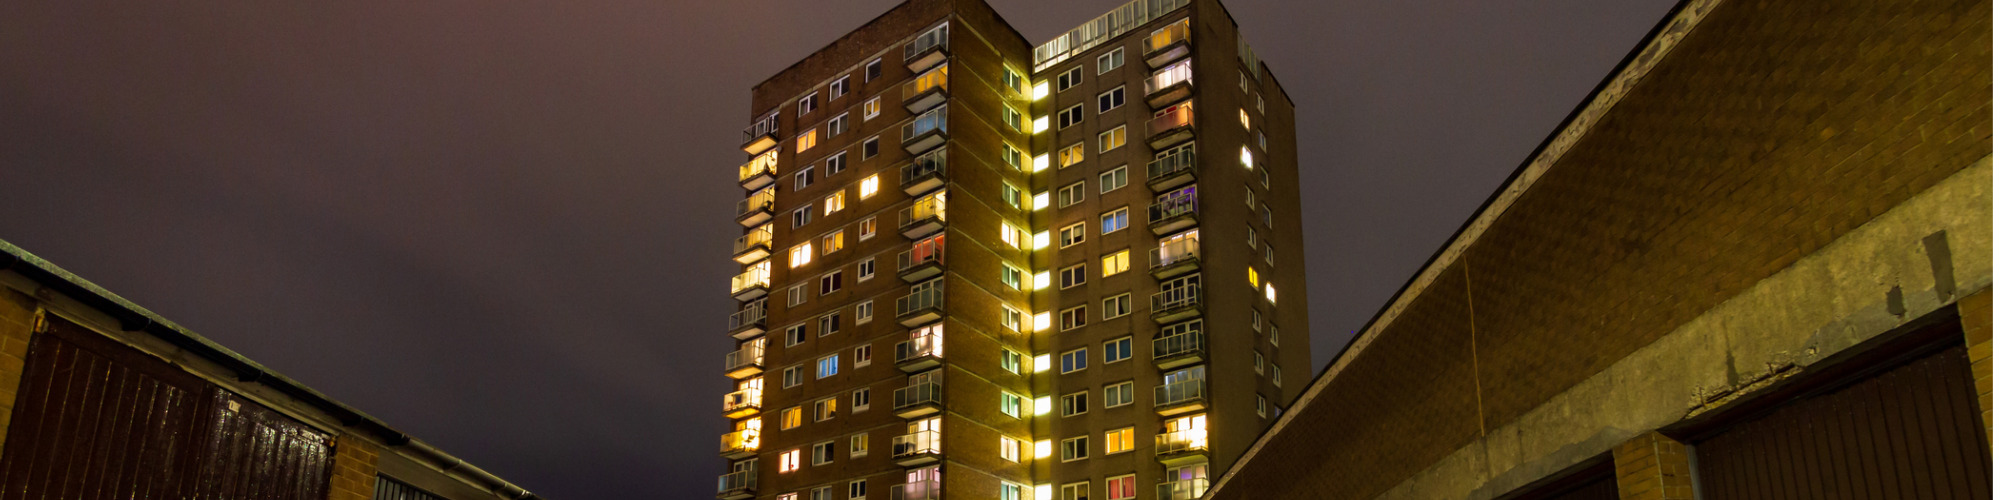 Understanding Social Housing Regulation in England - A Guide for Advisers